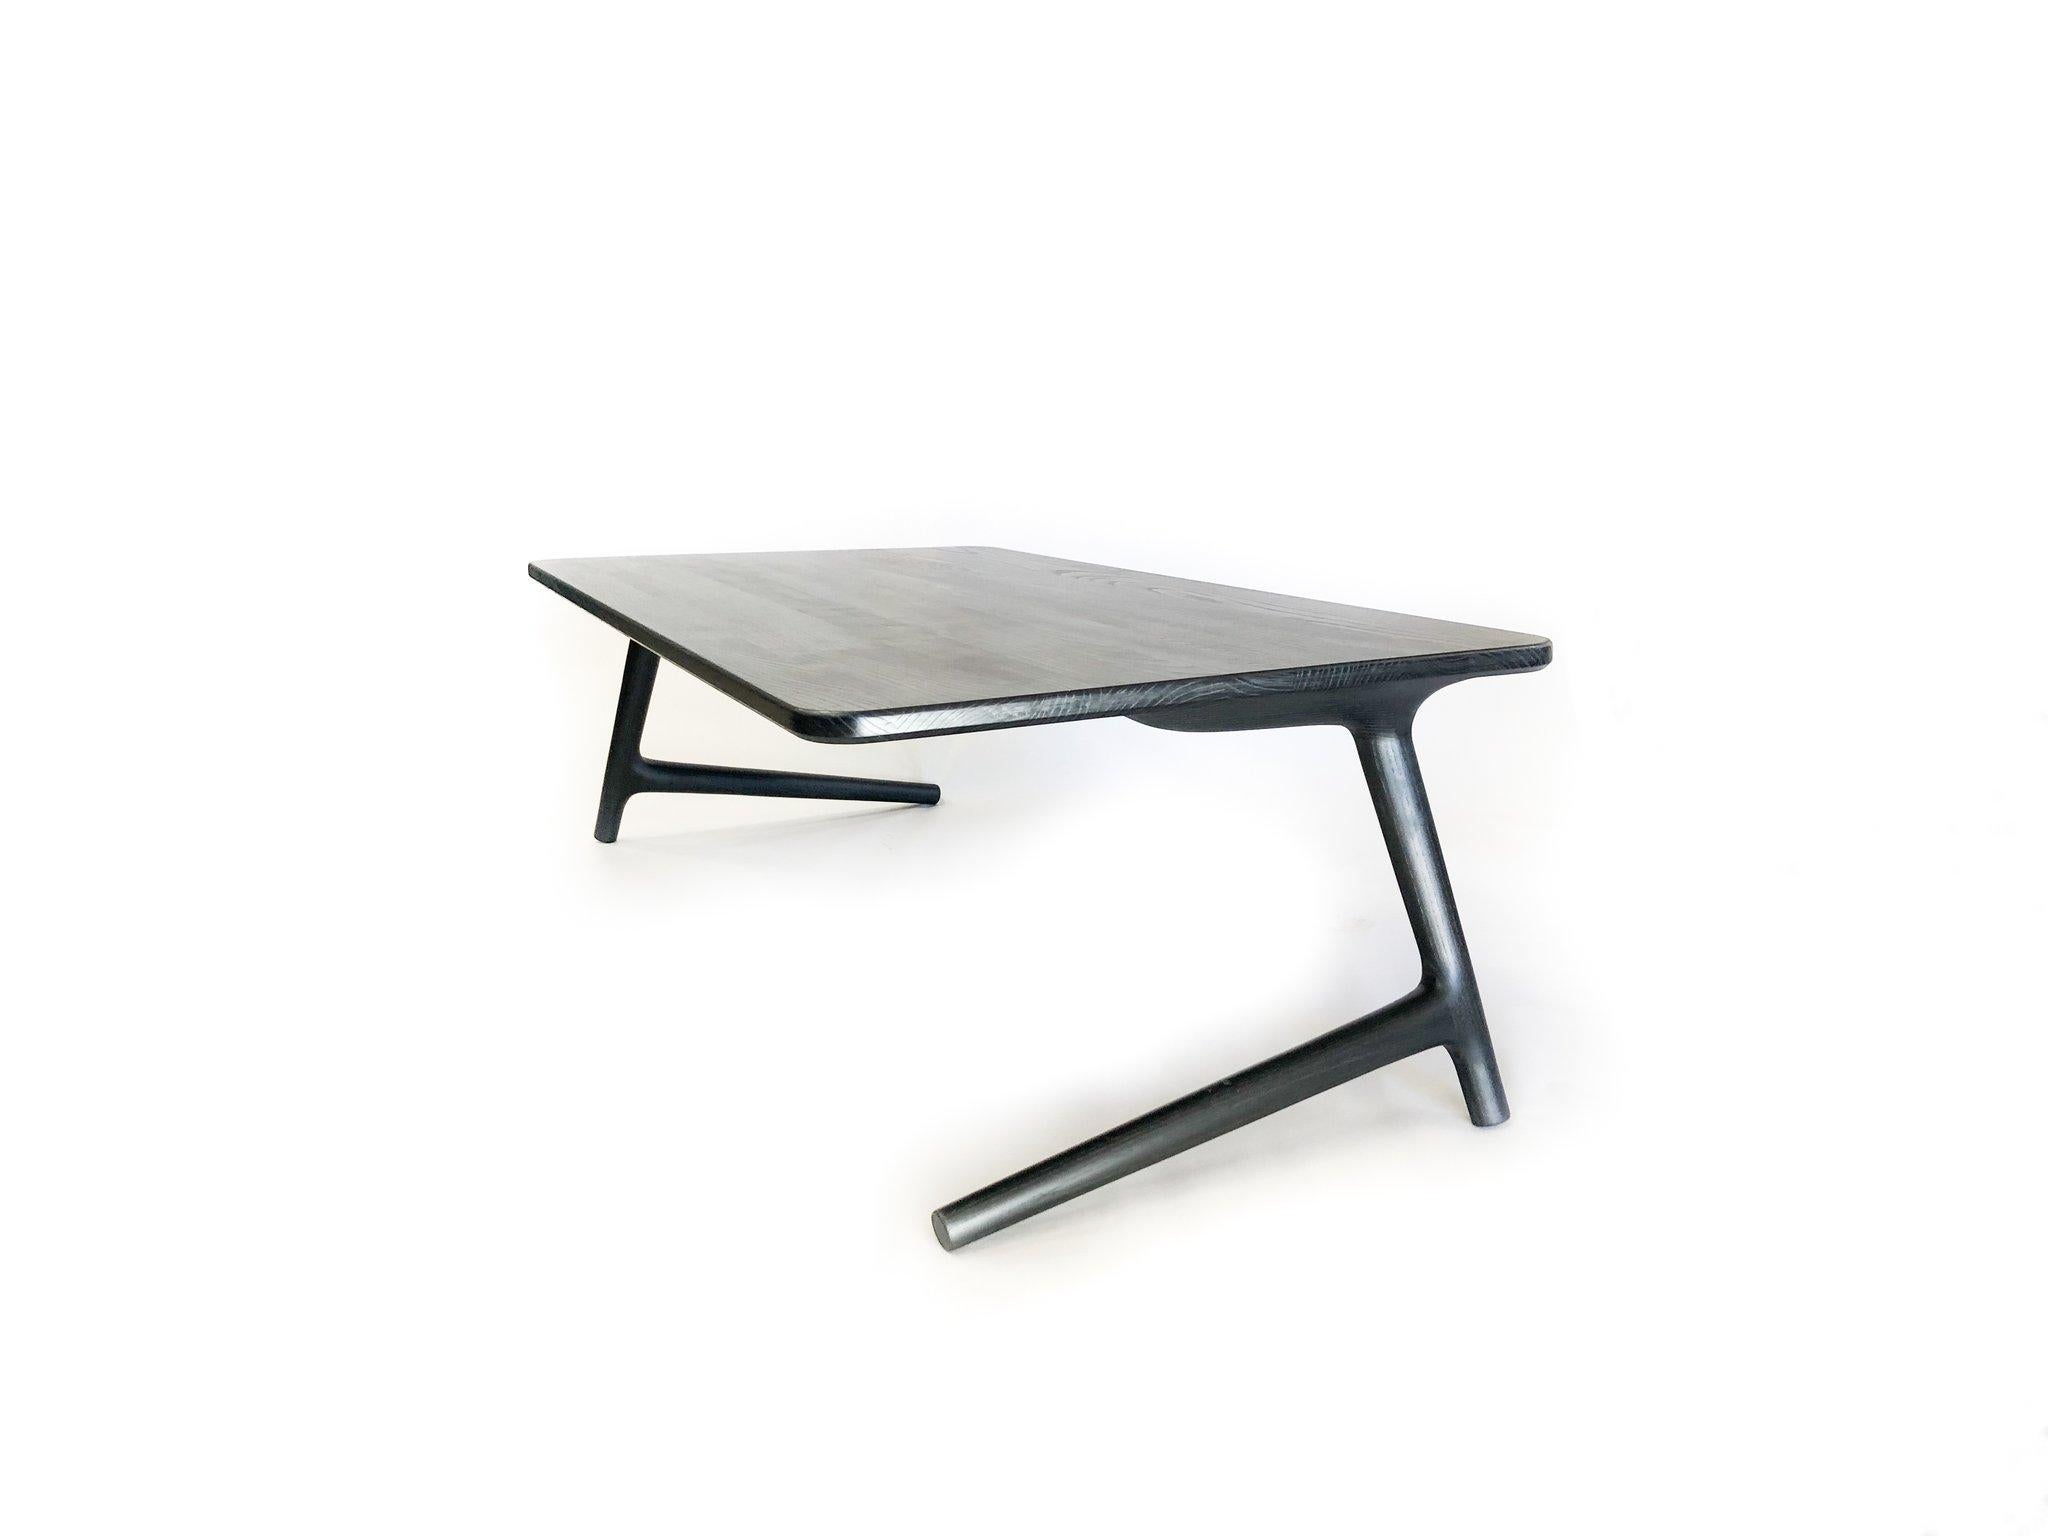 Charcoal ash coffee table by Fernweh Woodworking
Dimensions: W 121.9 x D 60.9 x H 40.6 cm 
Materials: Ash
Also available: Wood options: walnut, charcoal ash, white ash

A beautiful, minimal coffee table for your home. Handmade from Ash wood stained